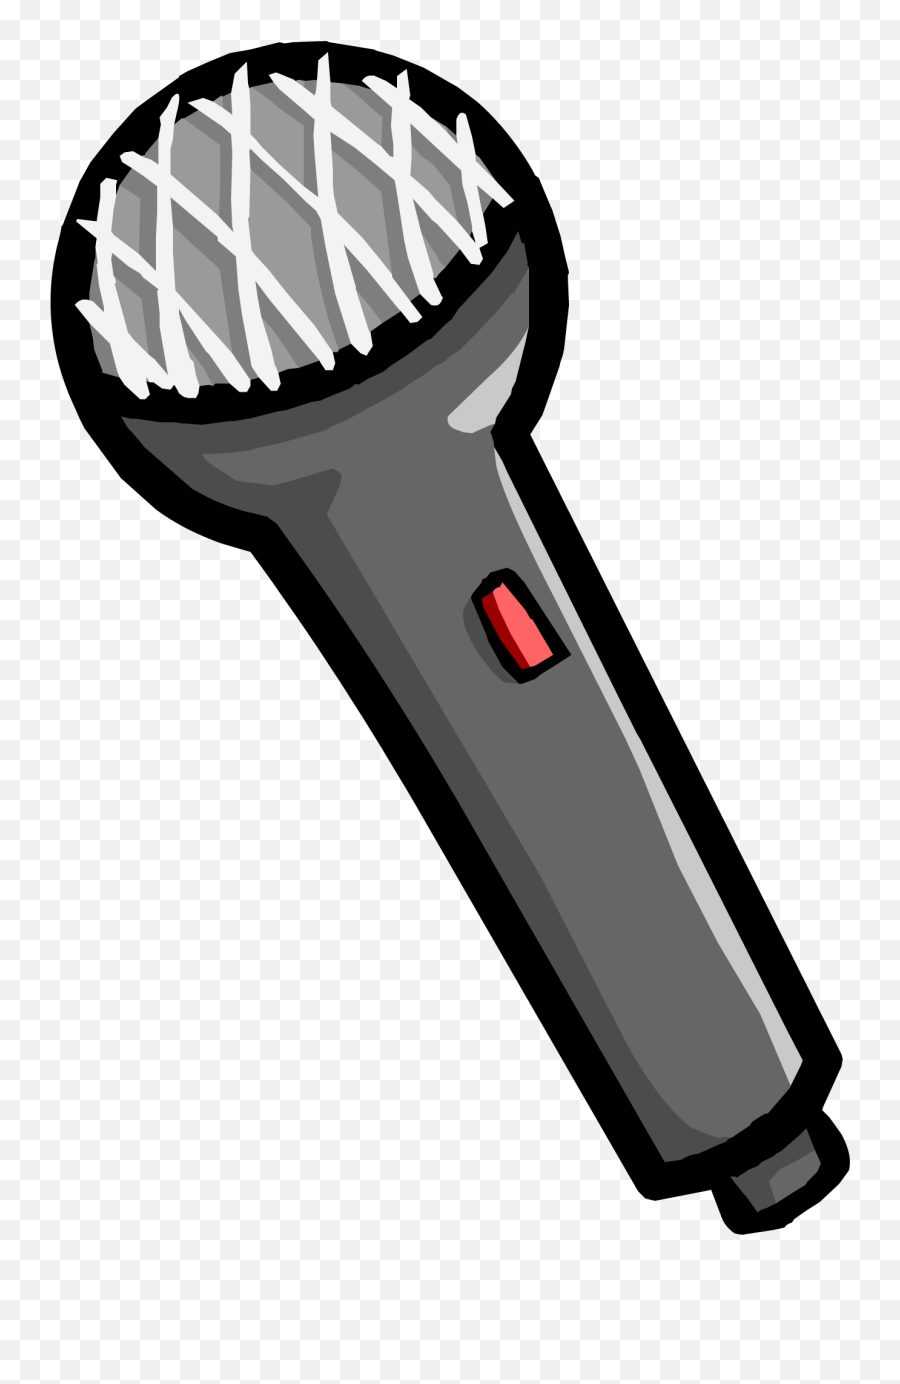 Download Microphone Icon - Club Penguin Microphone Clip Art Png,Mic Icon Png